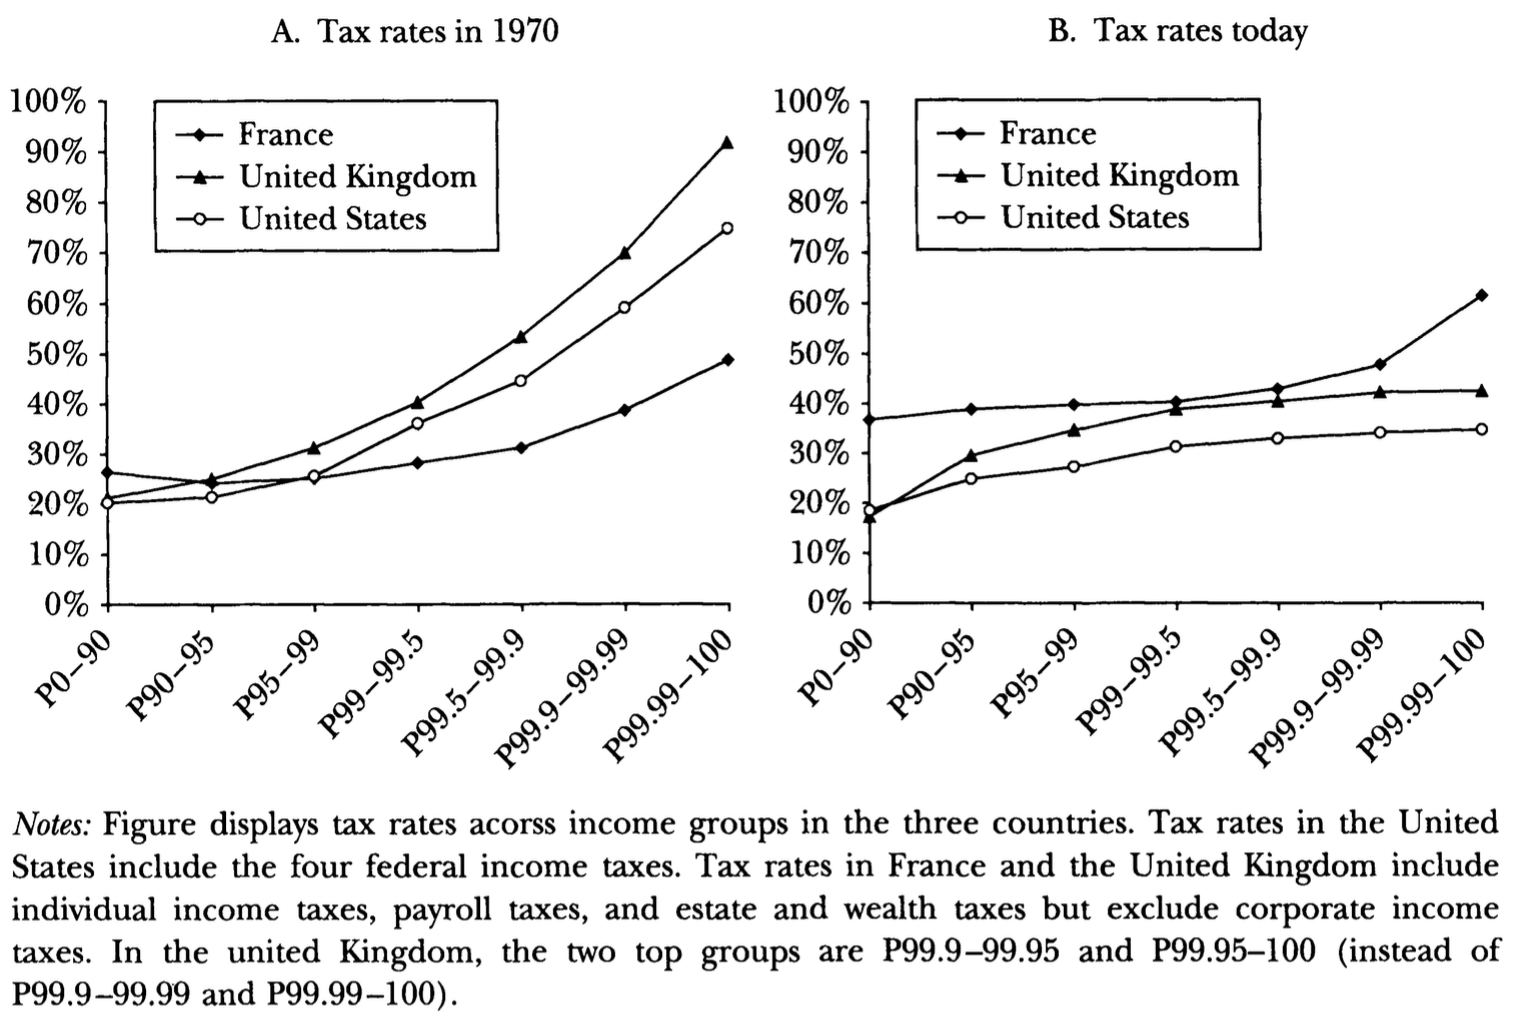 Average tax rates by income groups in France, the United Kingdom, and the United States, 1970 and 2005 – Figure 4 in Piketty and Saez (2007)<a class="ref" href="#note-16"><sup>16</sup></a>